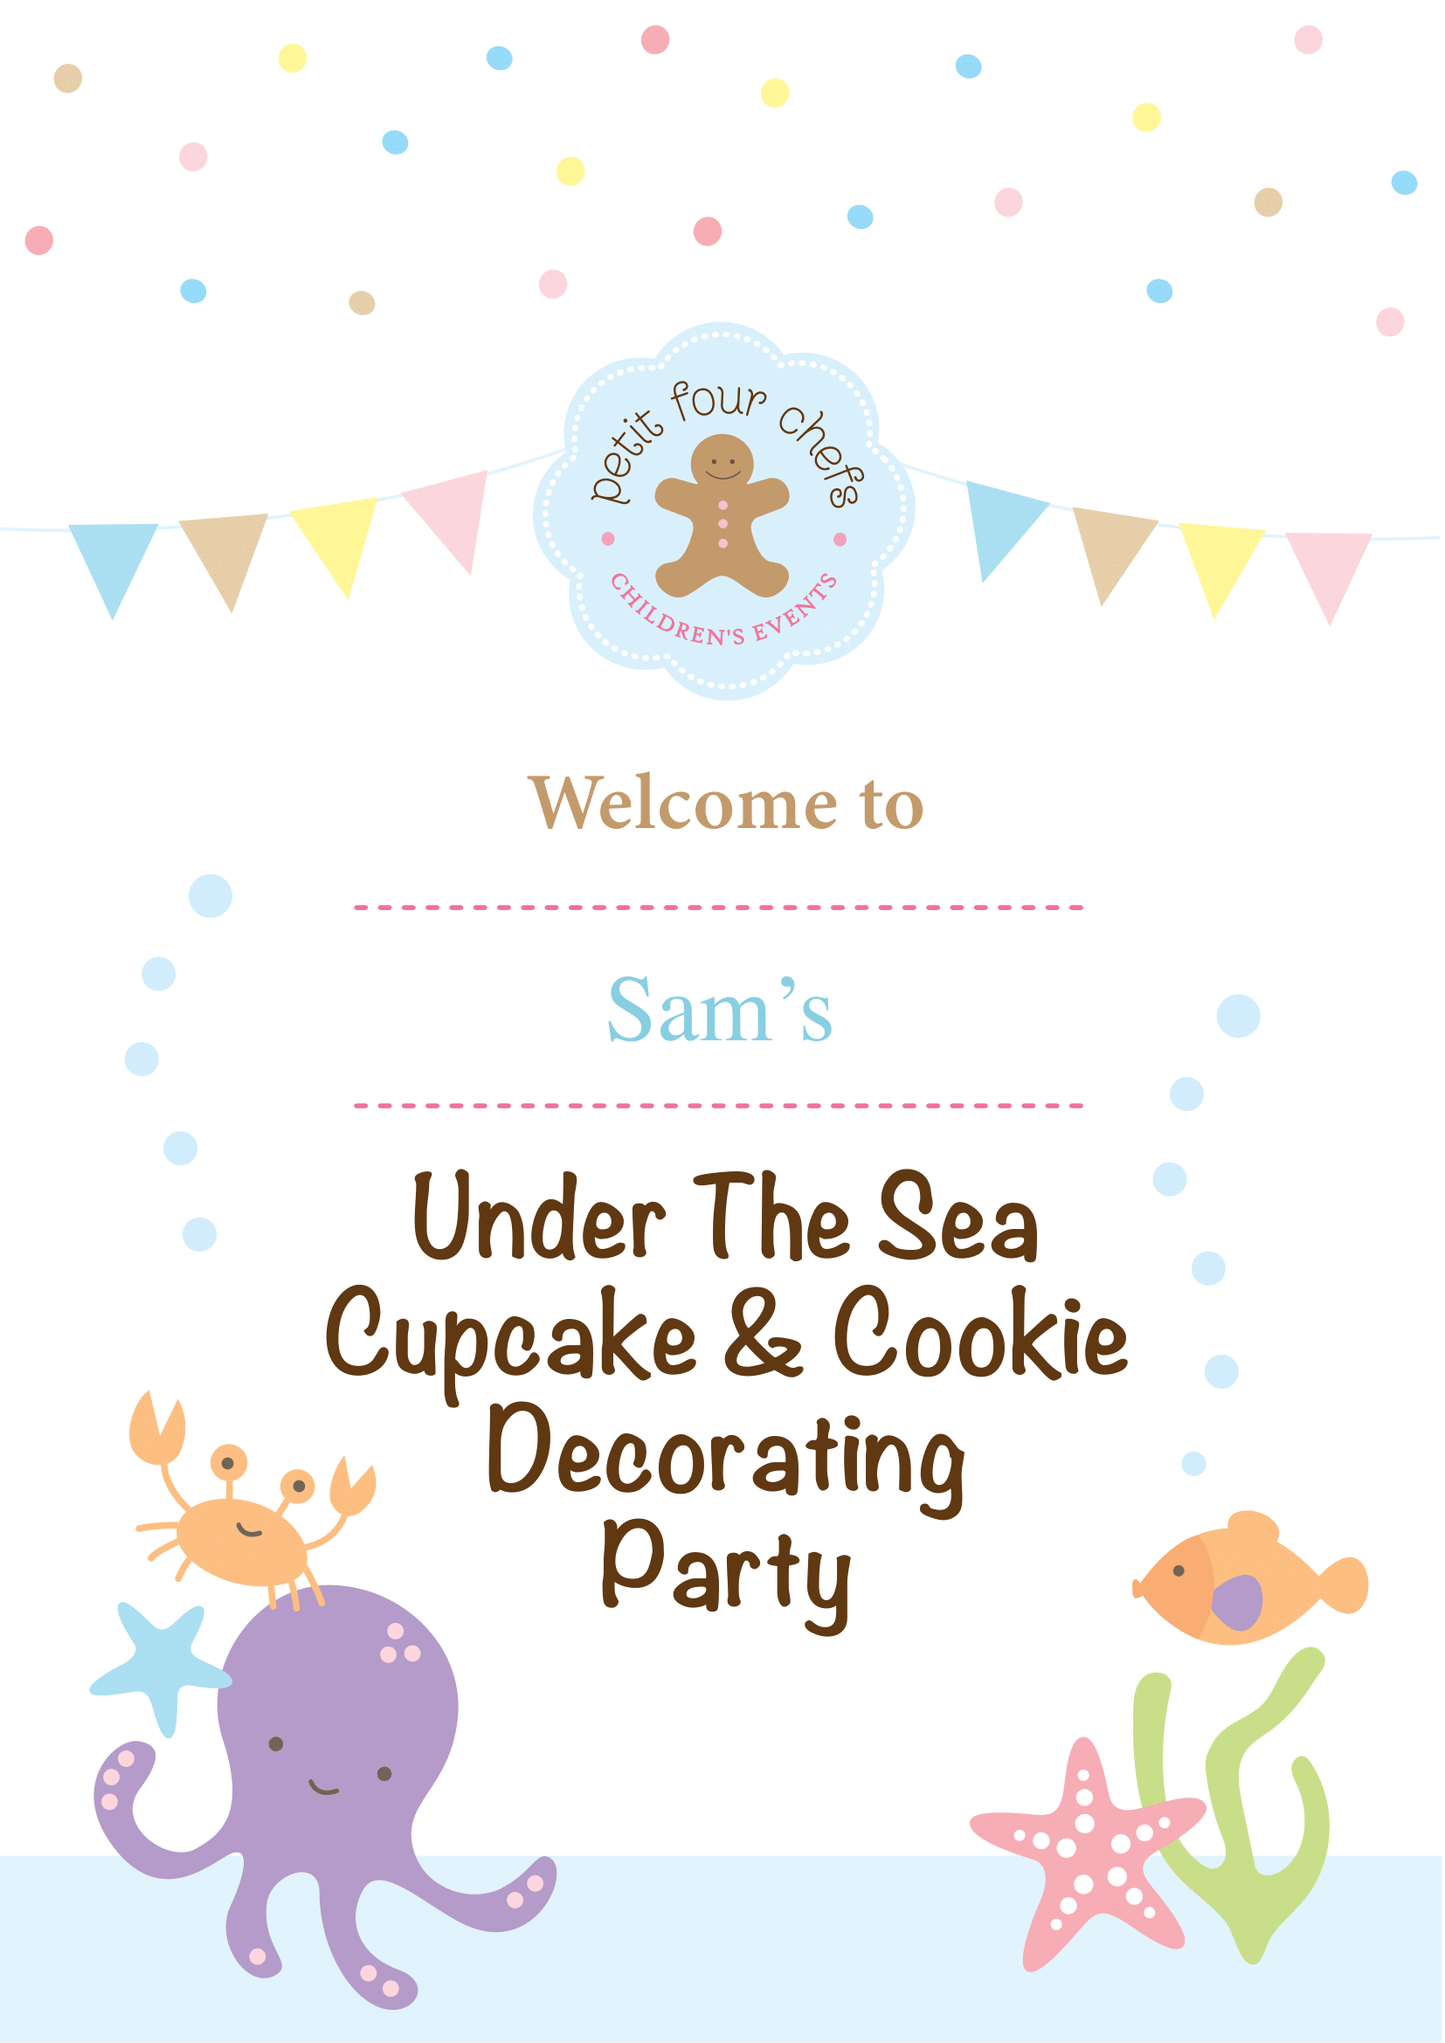 Under the Sea  Bake & Decorate Party Box